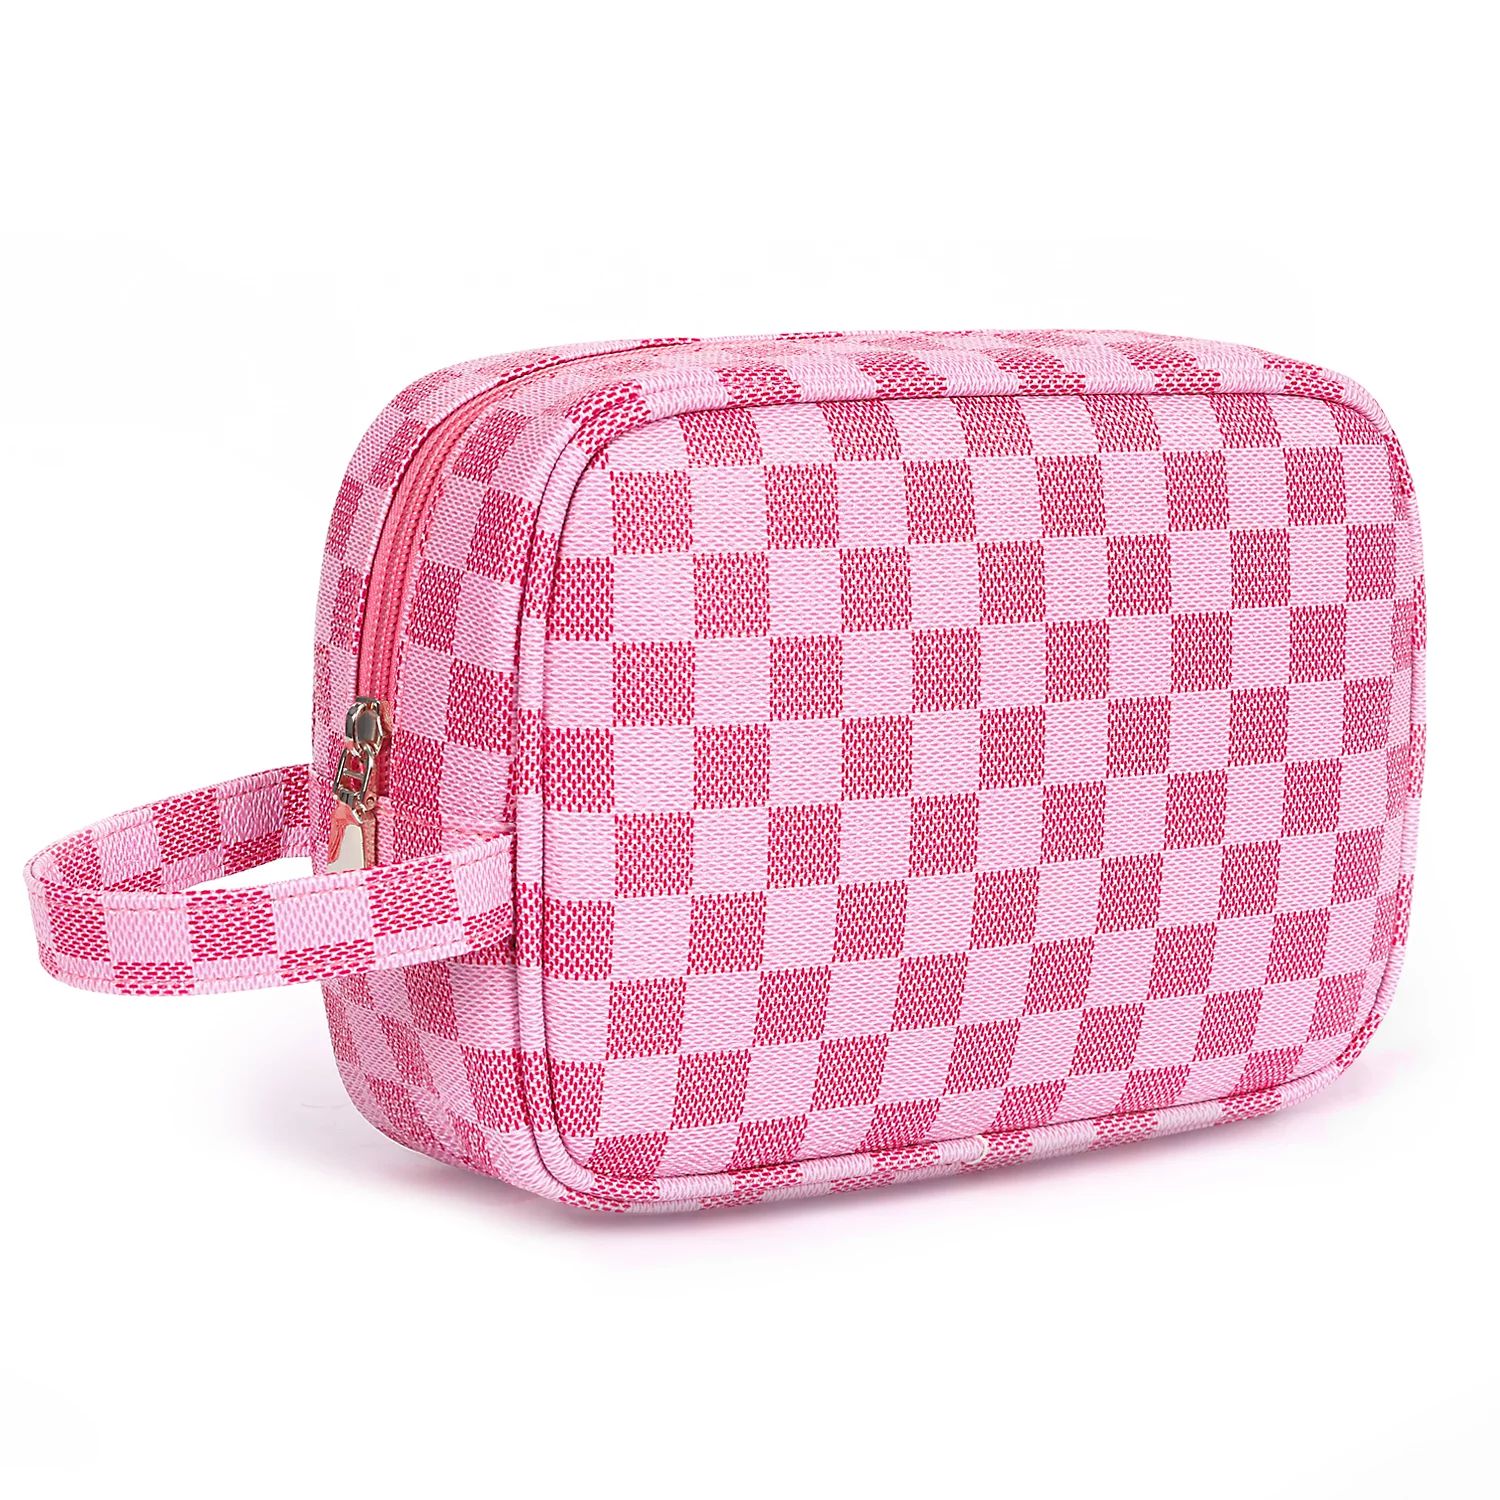 Toiletry Bag for Women, Pink Checkered Cosmetics Makeup Bag and Travel Toiletries Organizer Case ... | Walmart (US)